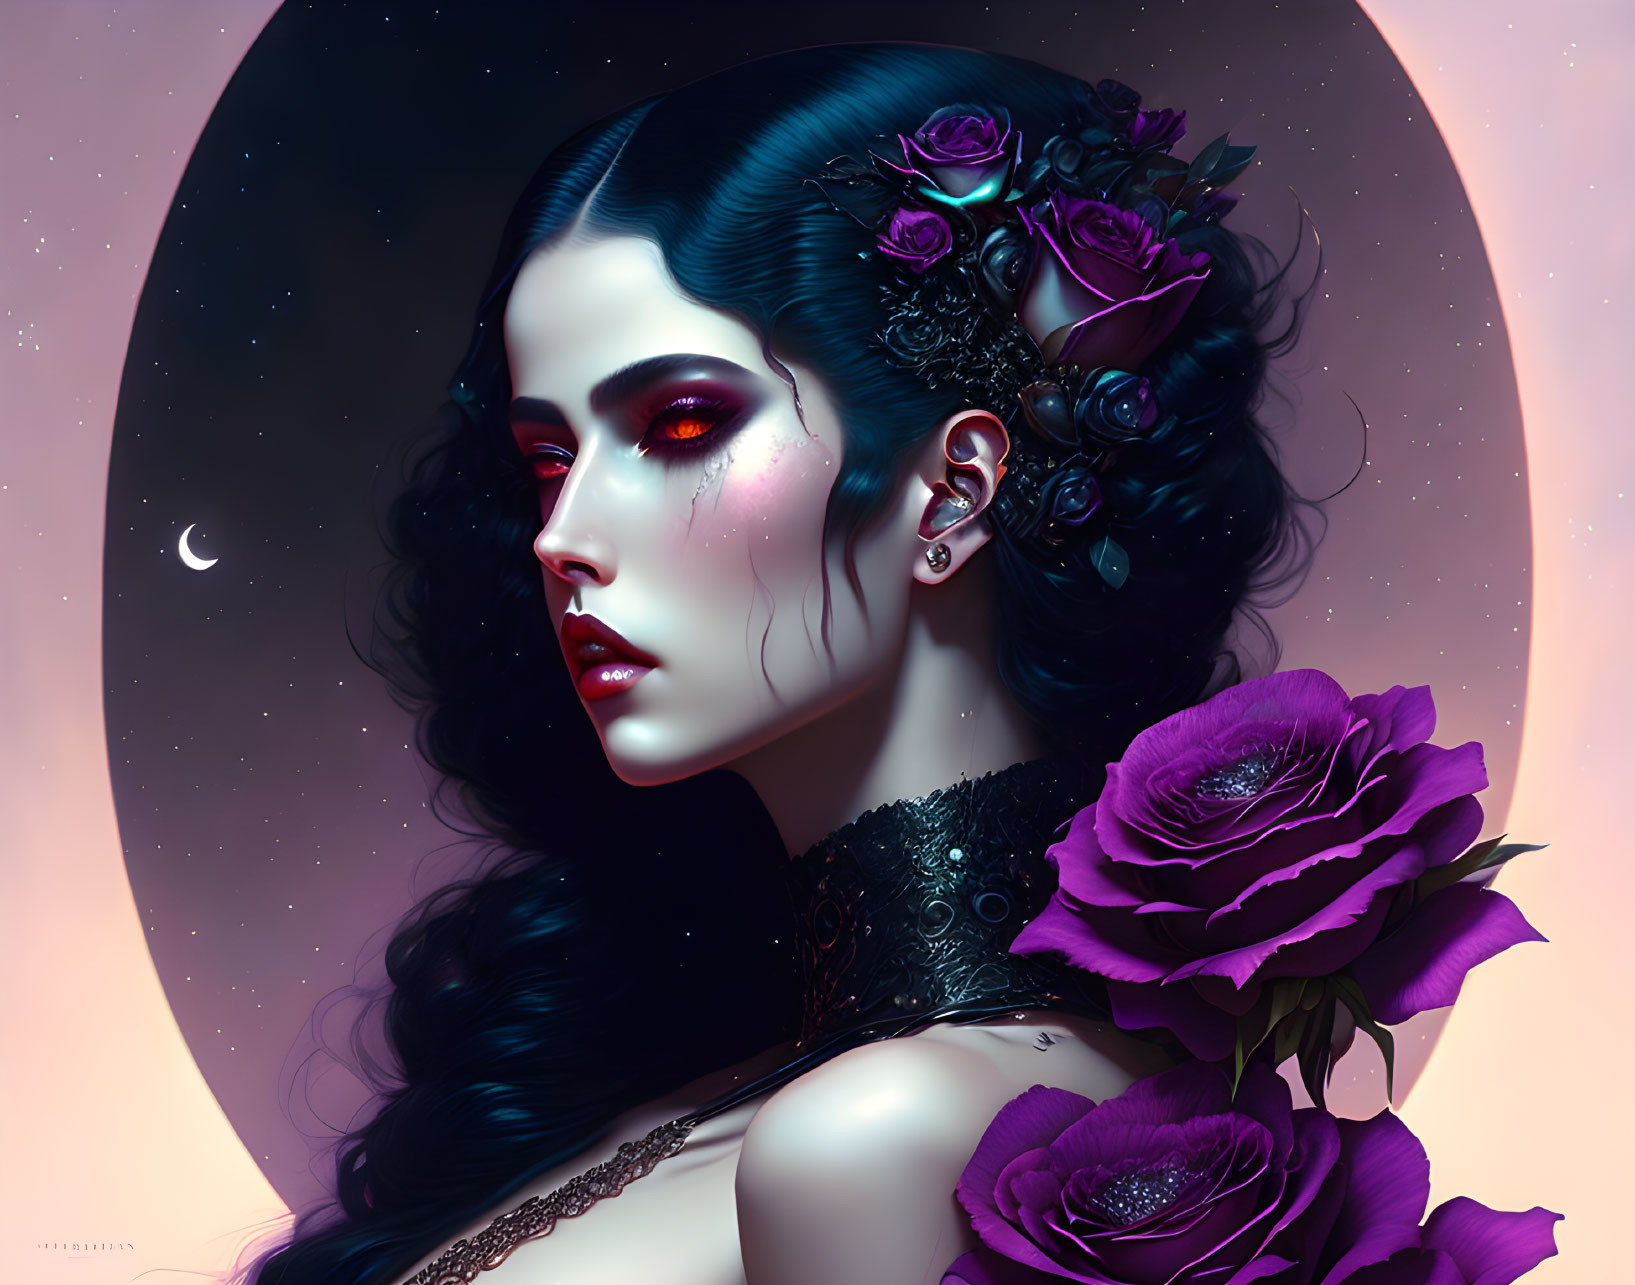 Fantasy woman portrait with dark hair, purple roses, crimson eyes, and crescent moon backdrop